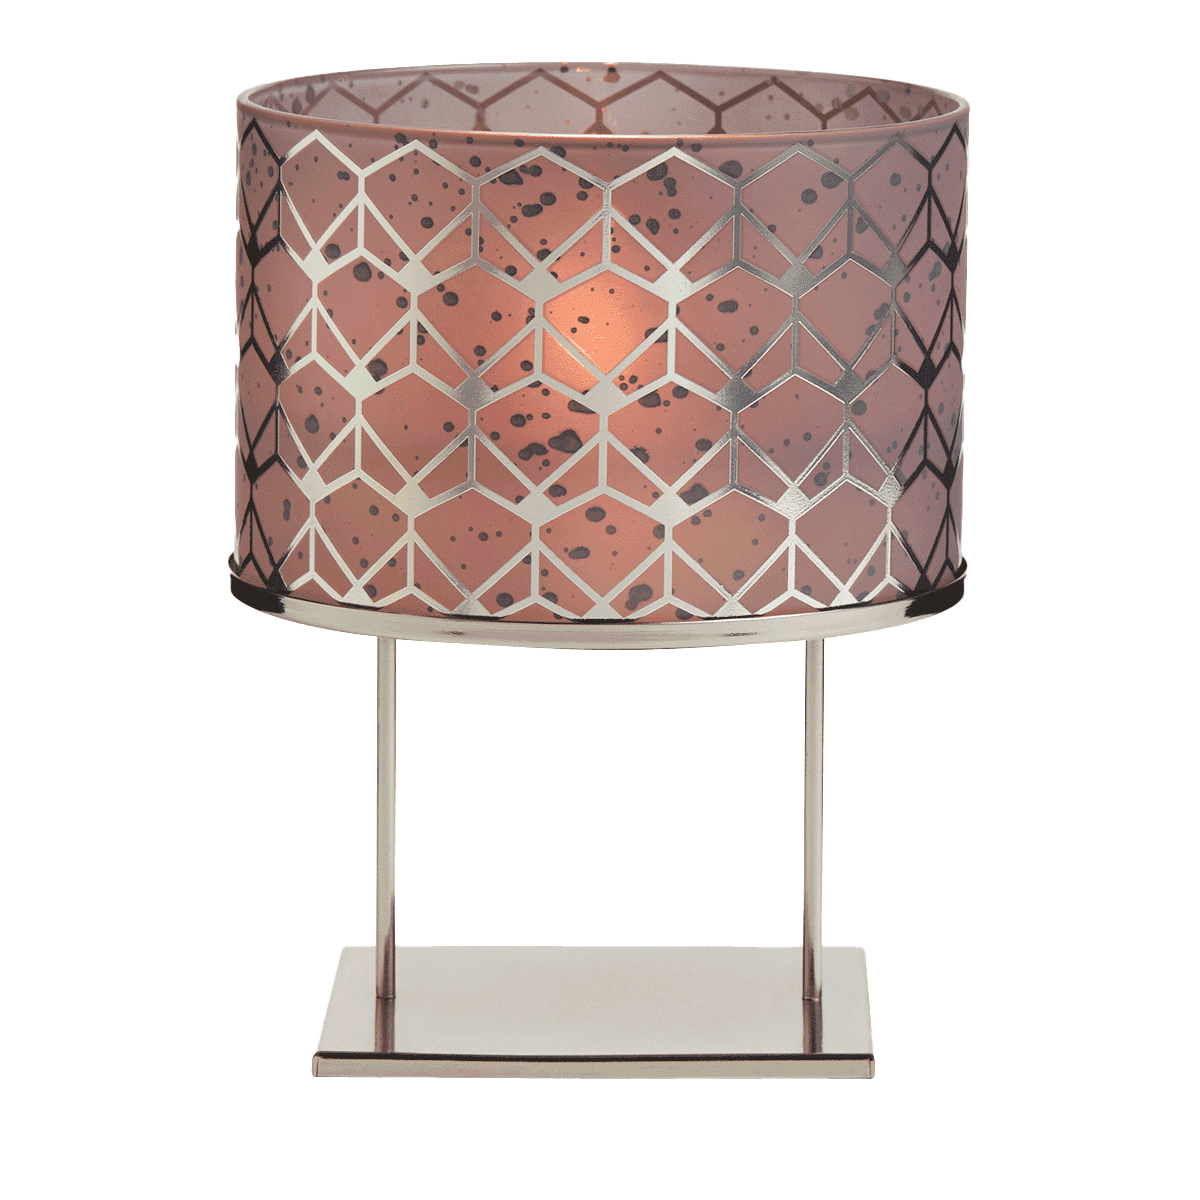 Deco Glam Candle Lamp - PartyLite US